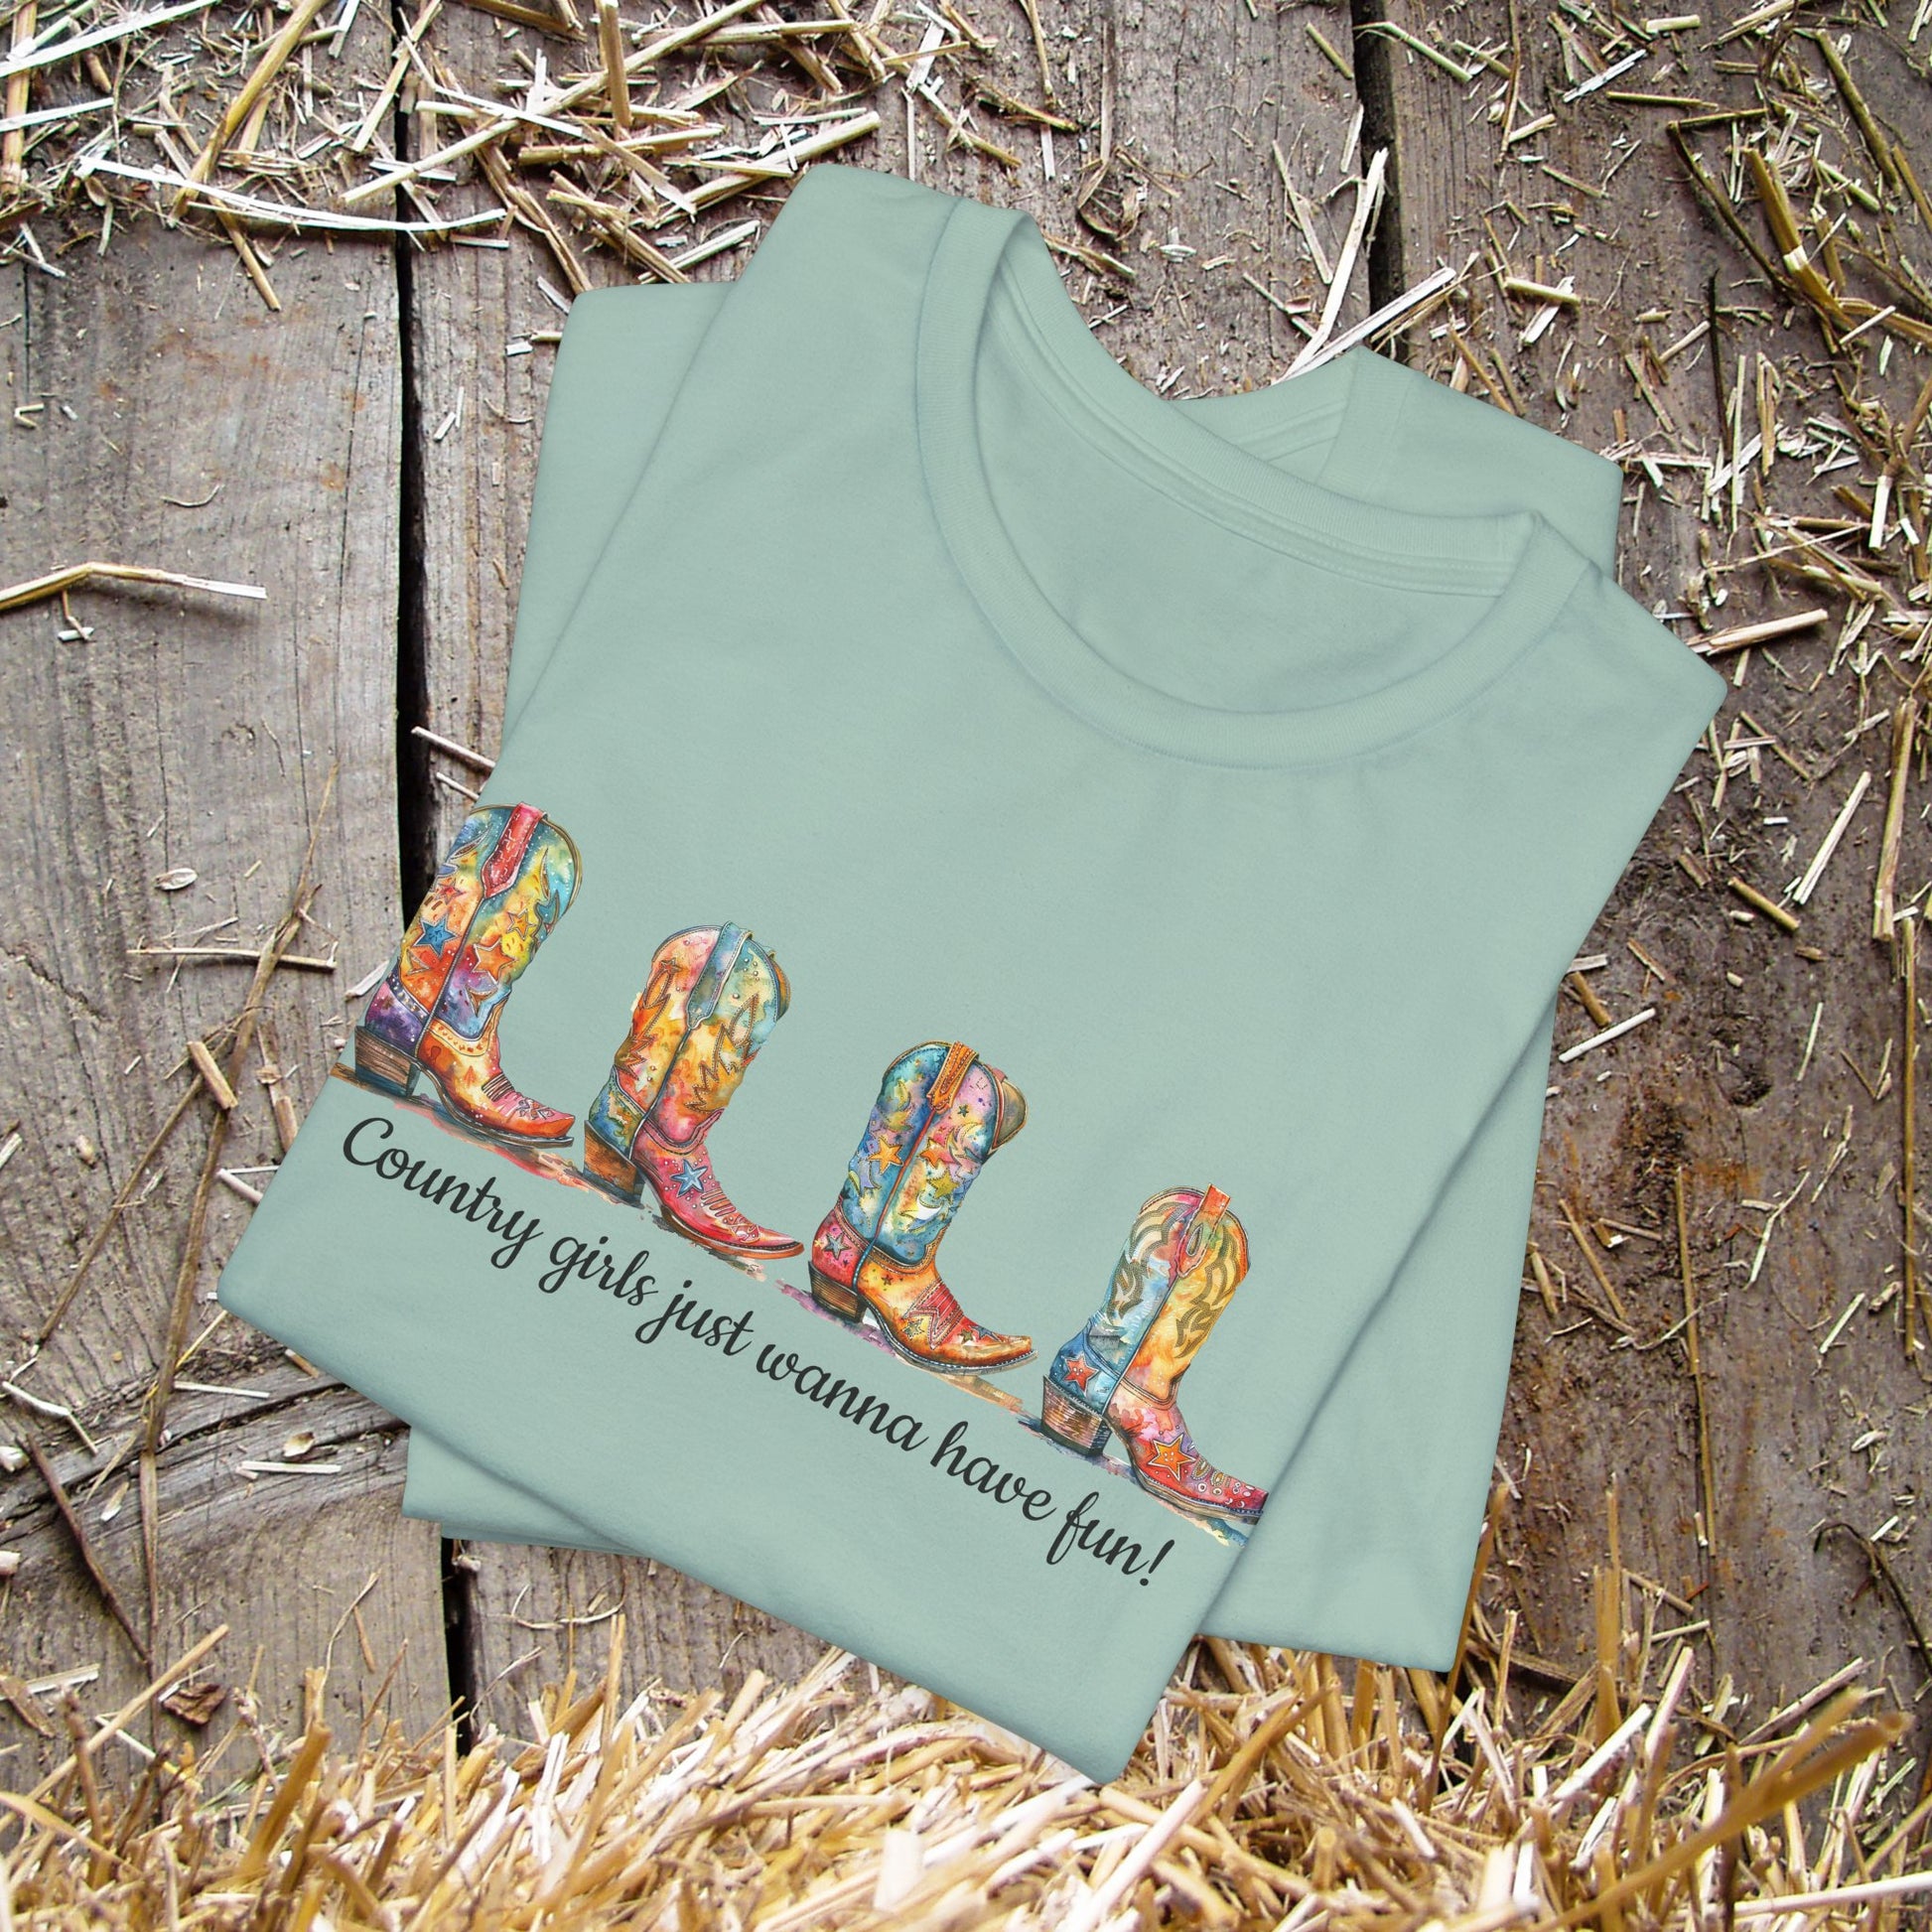 Cowgirl Boots T-Shirt, Country Concert Party Tee, Western Graphic Tee Girls Wanna Have Fun - FlooredByArt